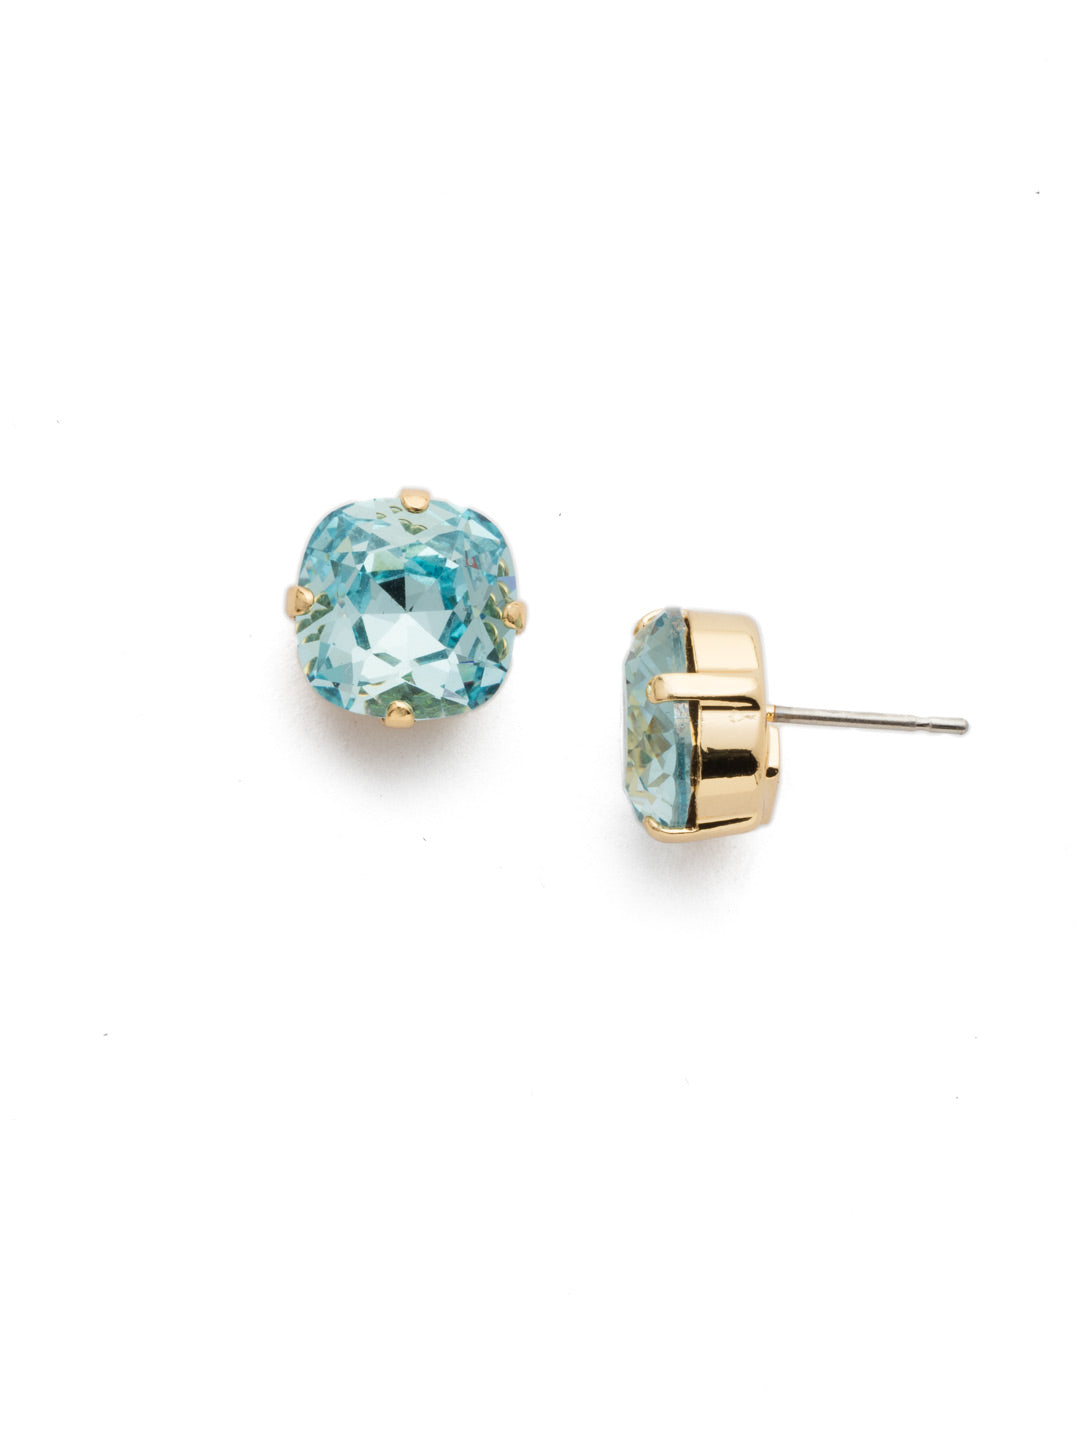 Halcyon Stud Earrings - EDH25BGAQU - <p>A beautiful, luminous cushion-cut crystal in a classic four-pronged setting that's ideal for everyday wear. From Sorrelli's Aquamarine collection in our Bright Gold-tone finish.</p>